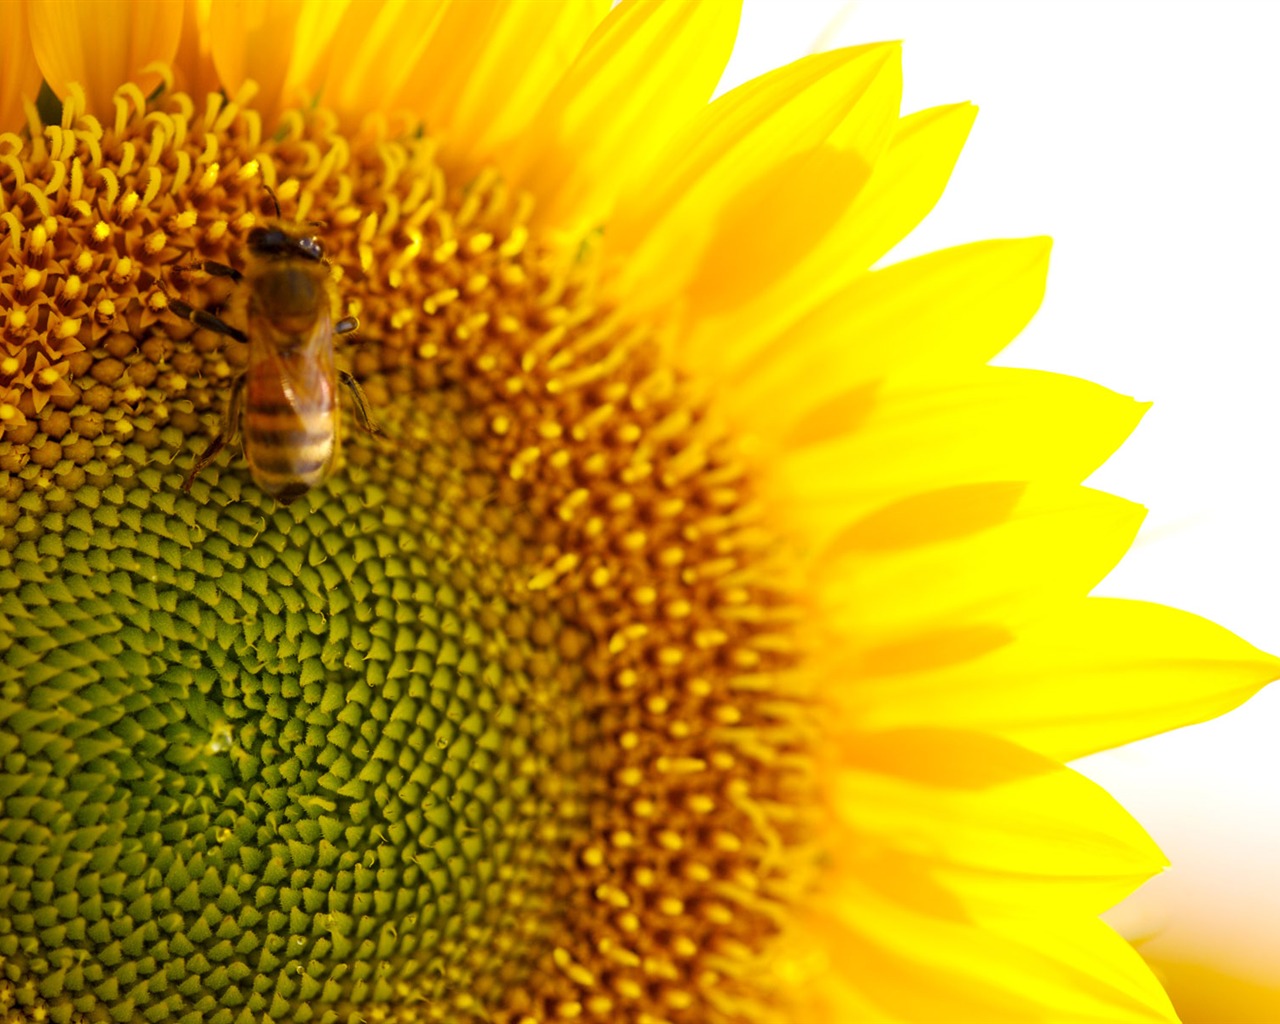 Sunny sunflower photo HD Wallpapers #33 - 1280x1024